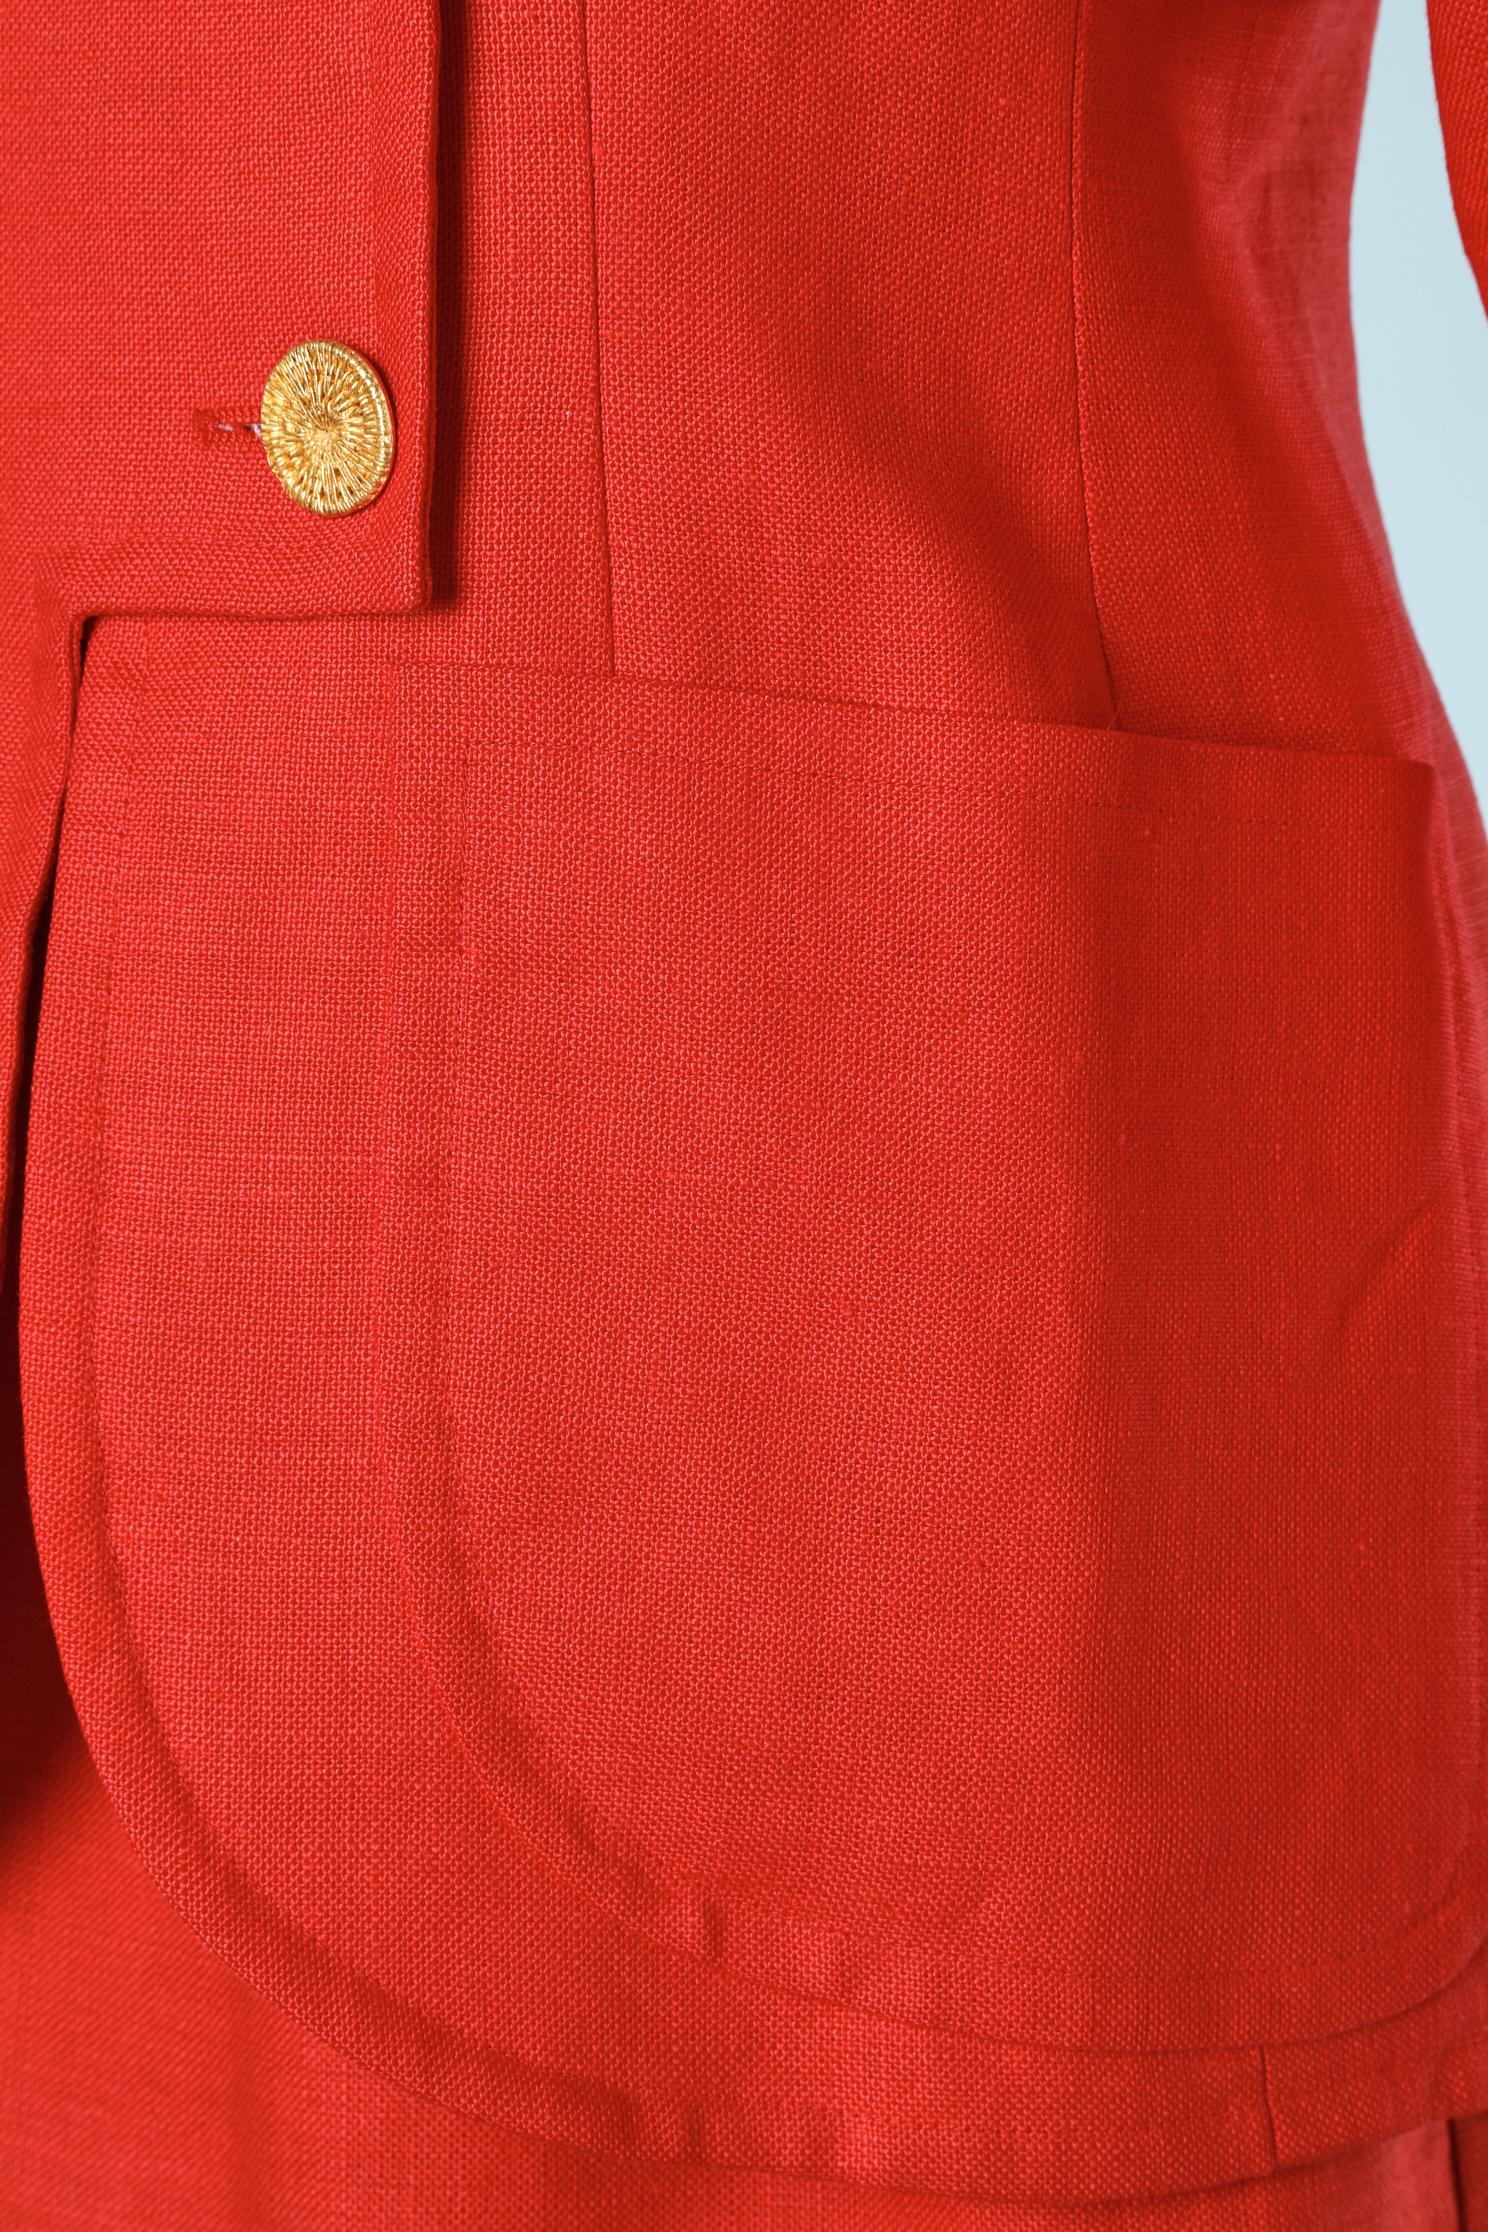 Red linen skirt-suit with jewlerry buttons Yves Saint Laurent Rive Gauche SS1992 In Excellent Condition For Sale In Saint-Ouen-Sur-Seine, FR